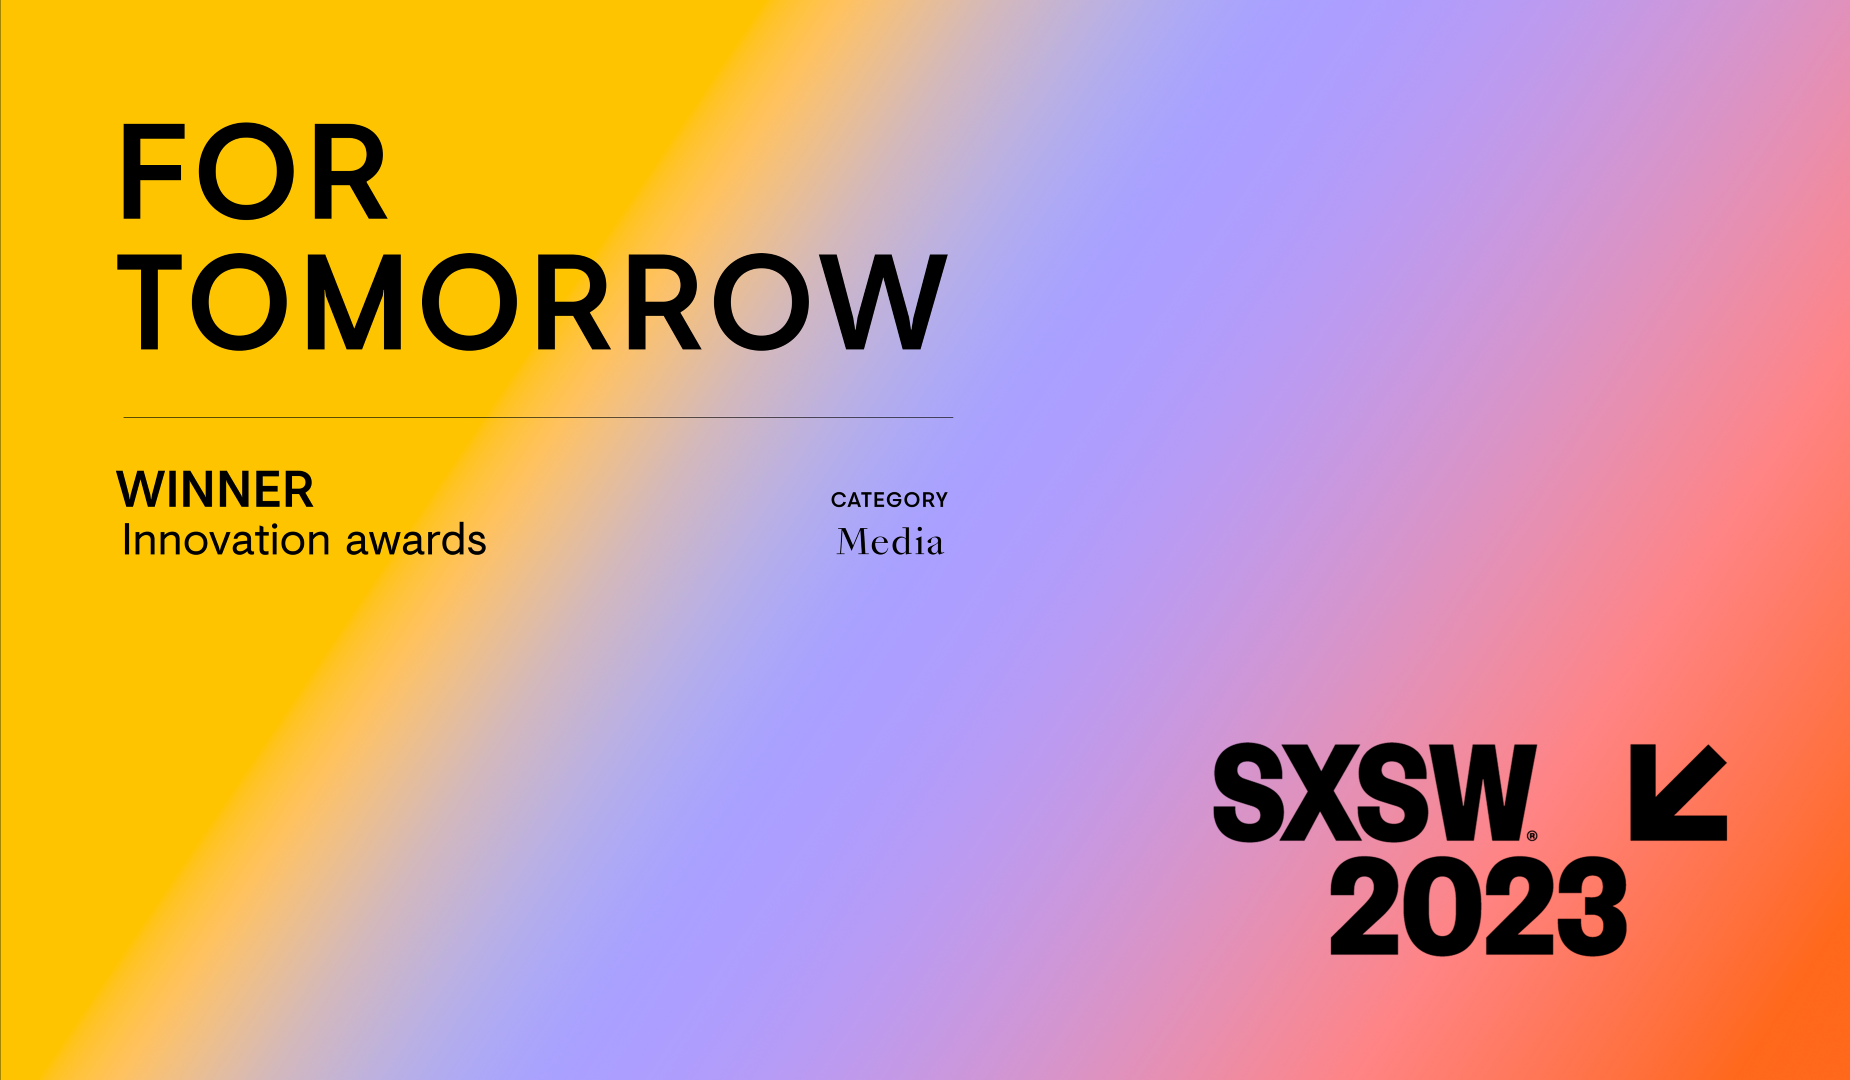 Hyundai Motor and UNDP’s ‘for Tomorrow’ Project Wins Media Category at 2023 SXSW Innovation Awards